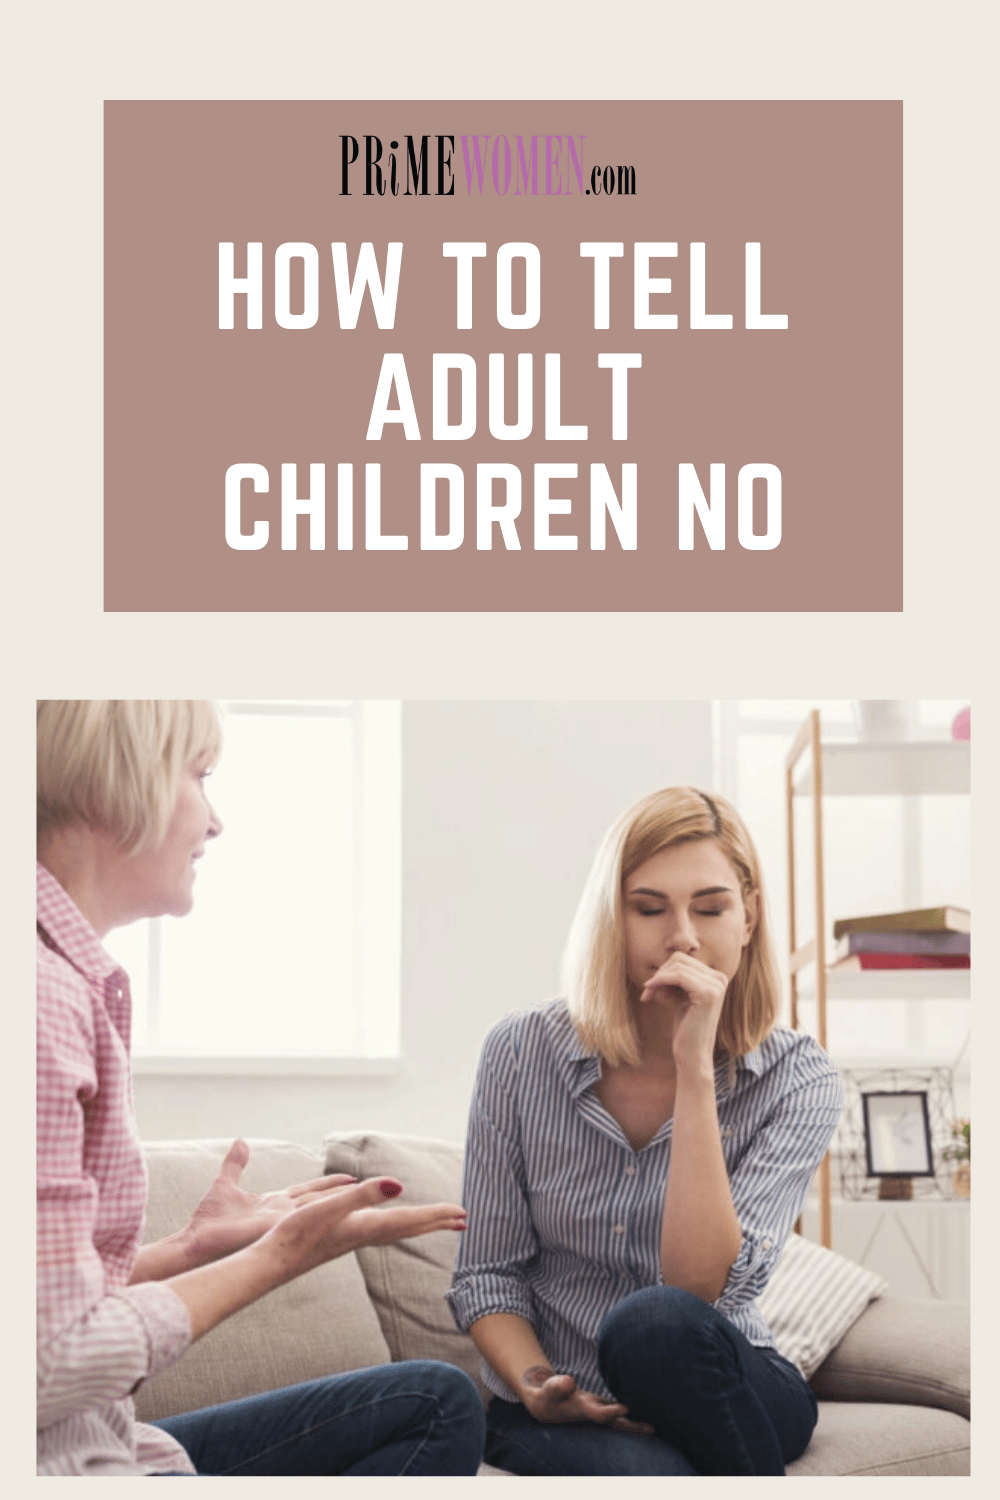 How to tell adult children no